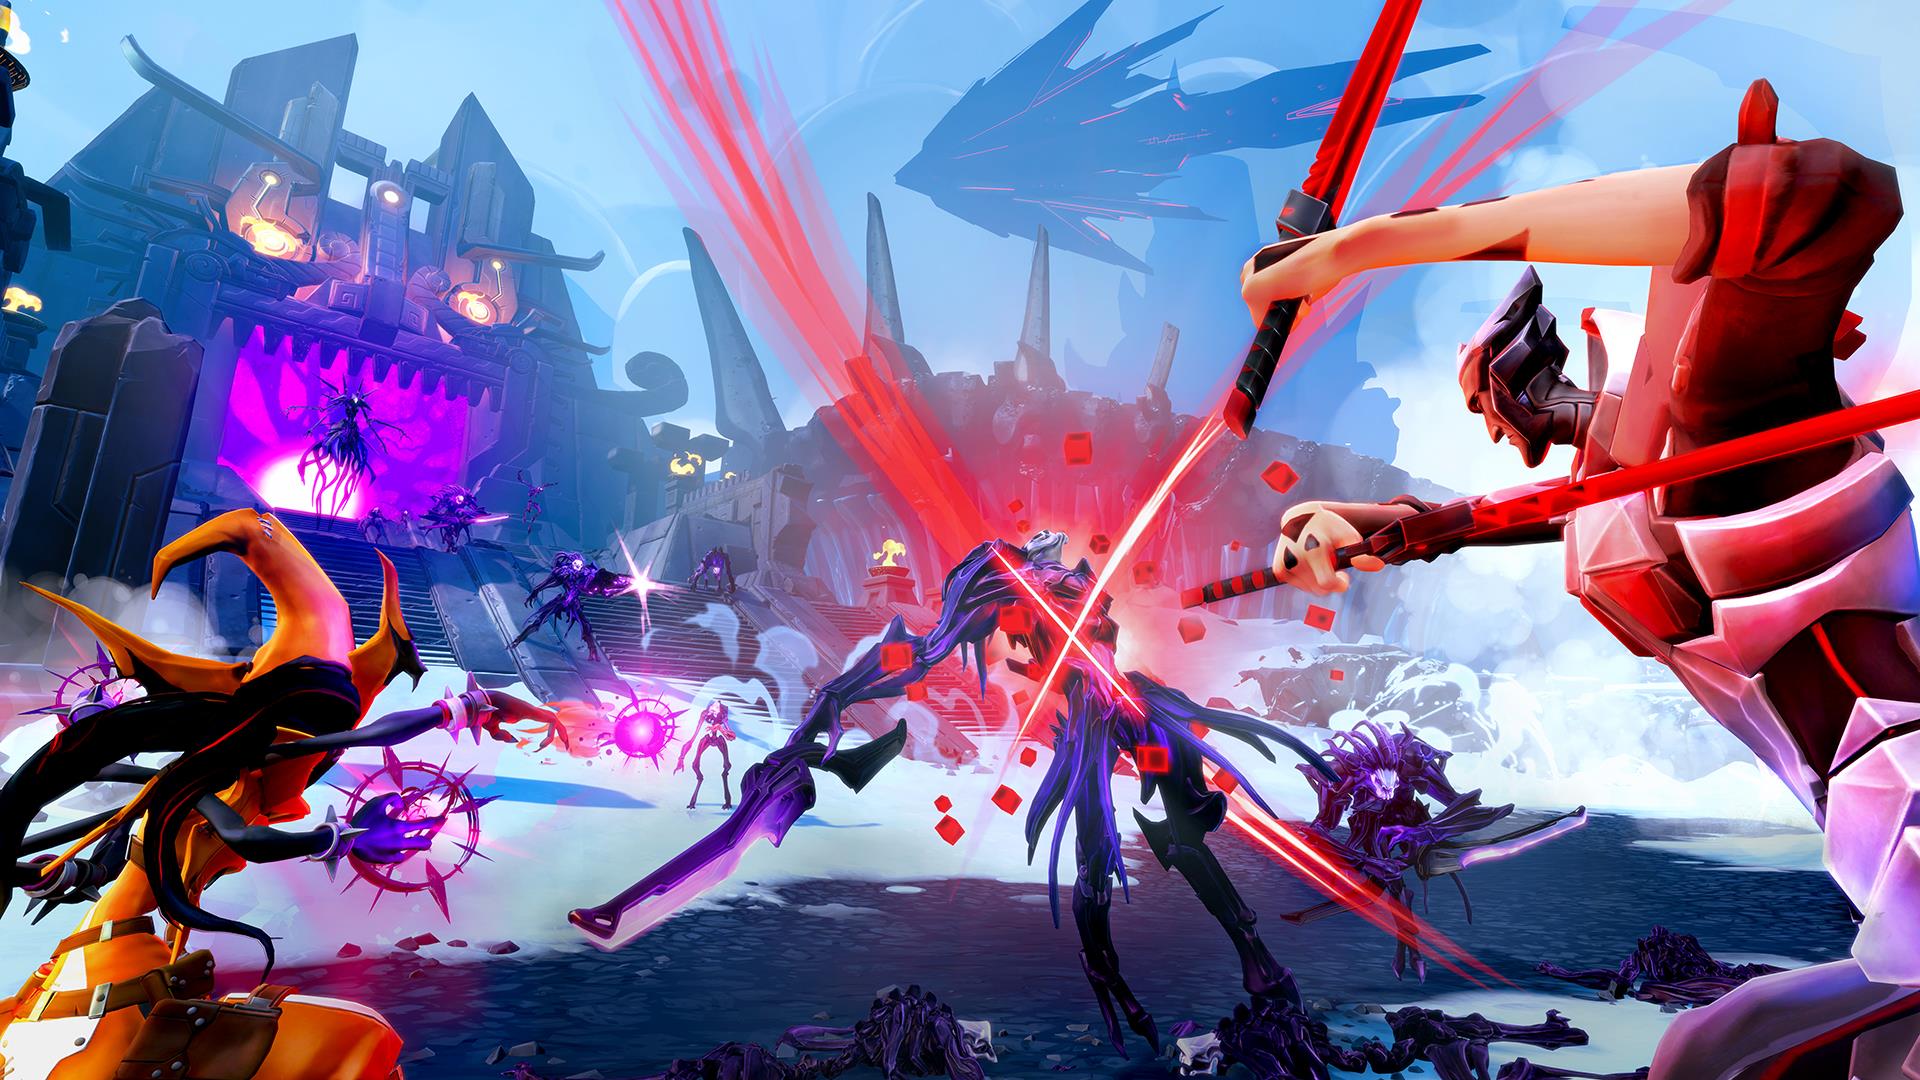 Image for Battleborn PC system requirements revealed